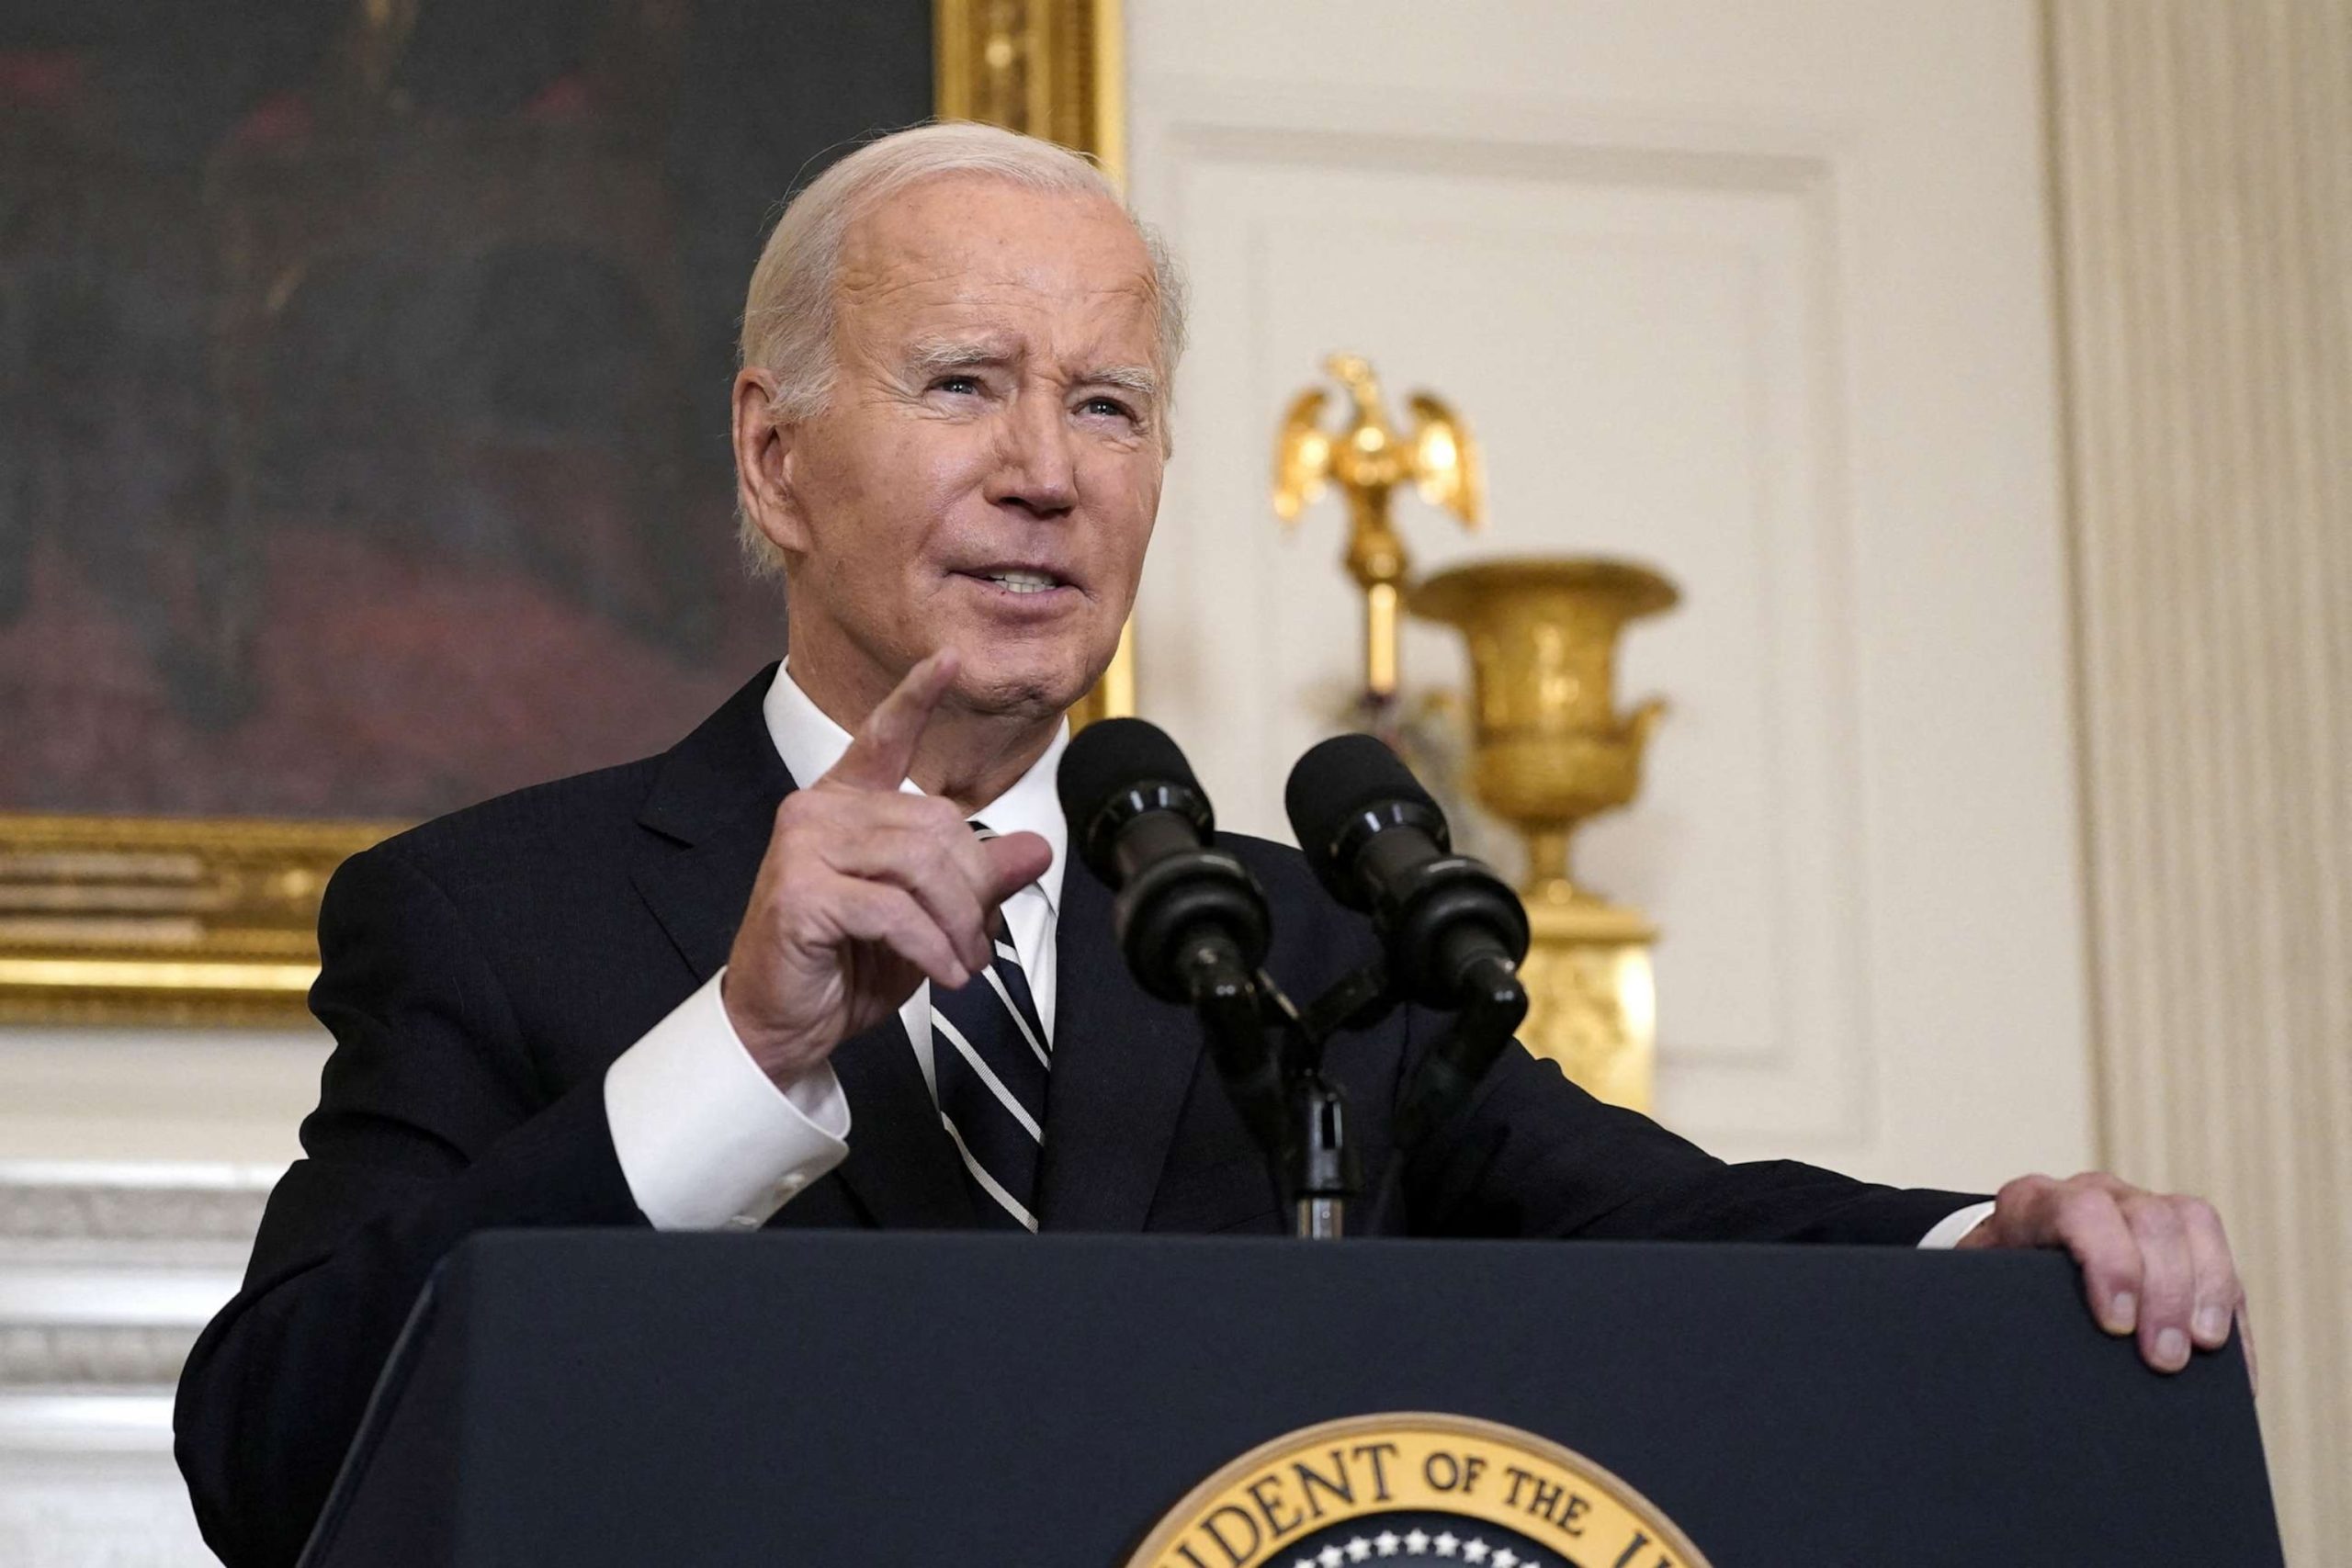 Leading LGBTQ+ groups endorse Biden for reelection, making him the first choice for ABC.